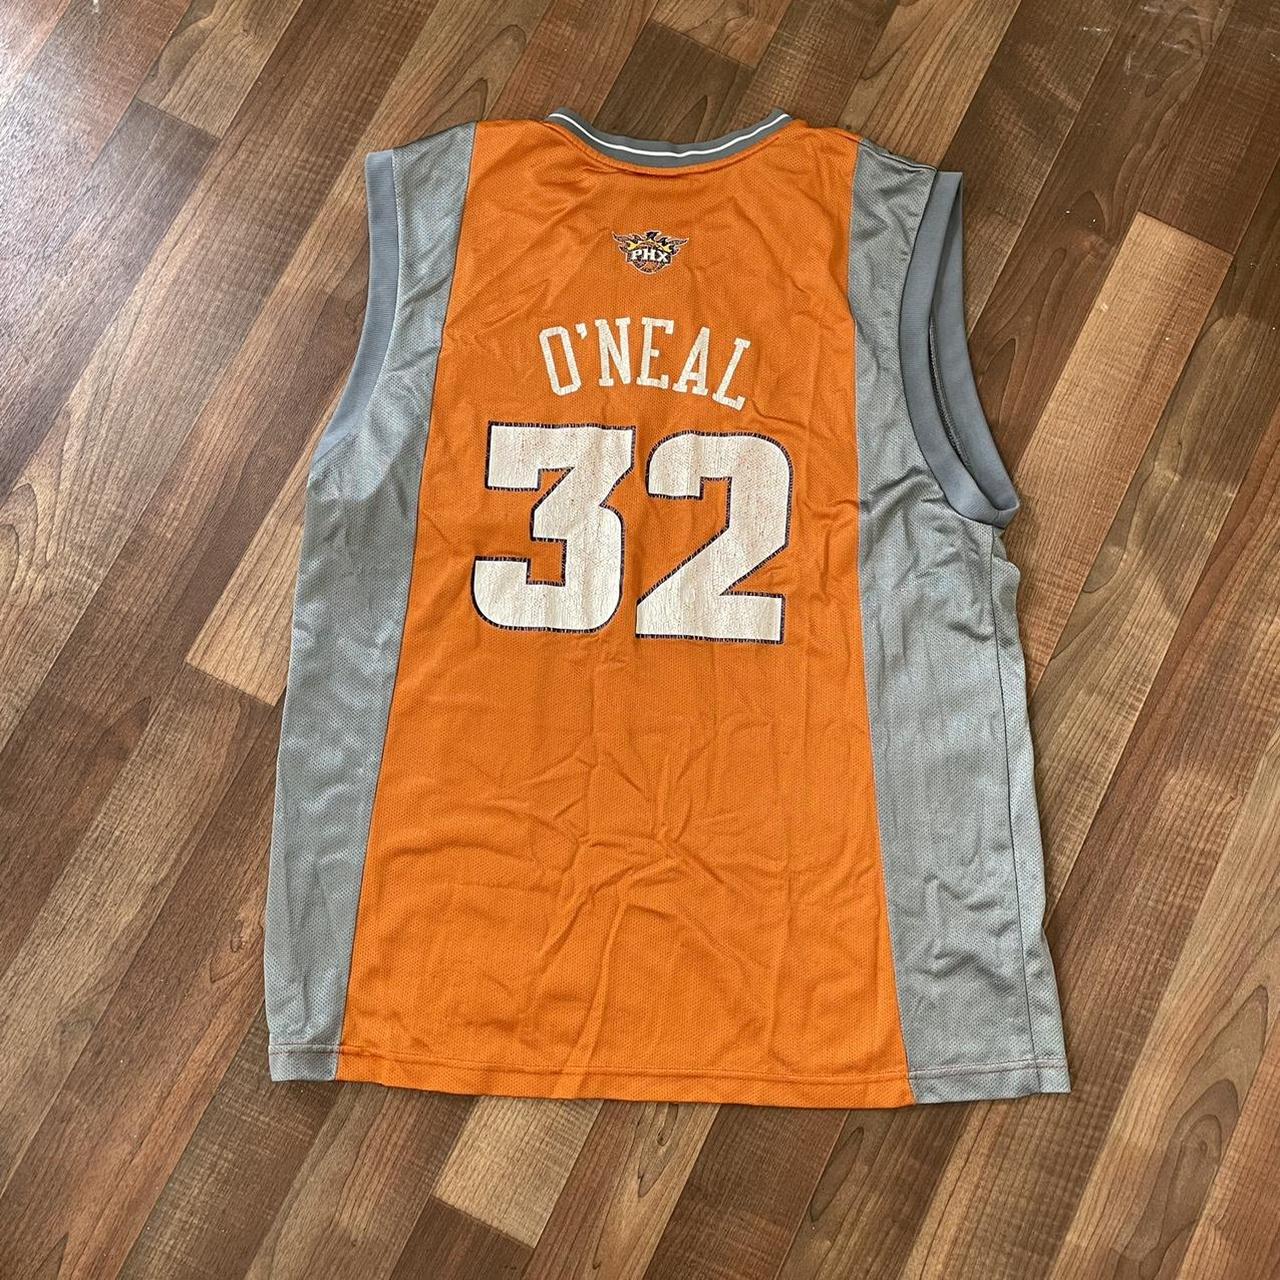 Vintage Shaquille O’Neal Suns jersey. Size XL